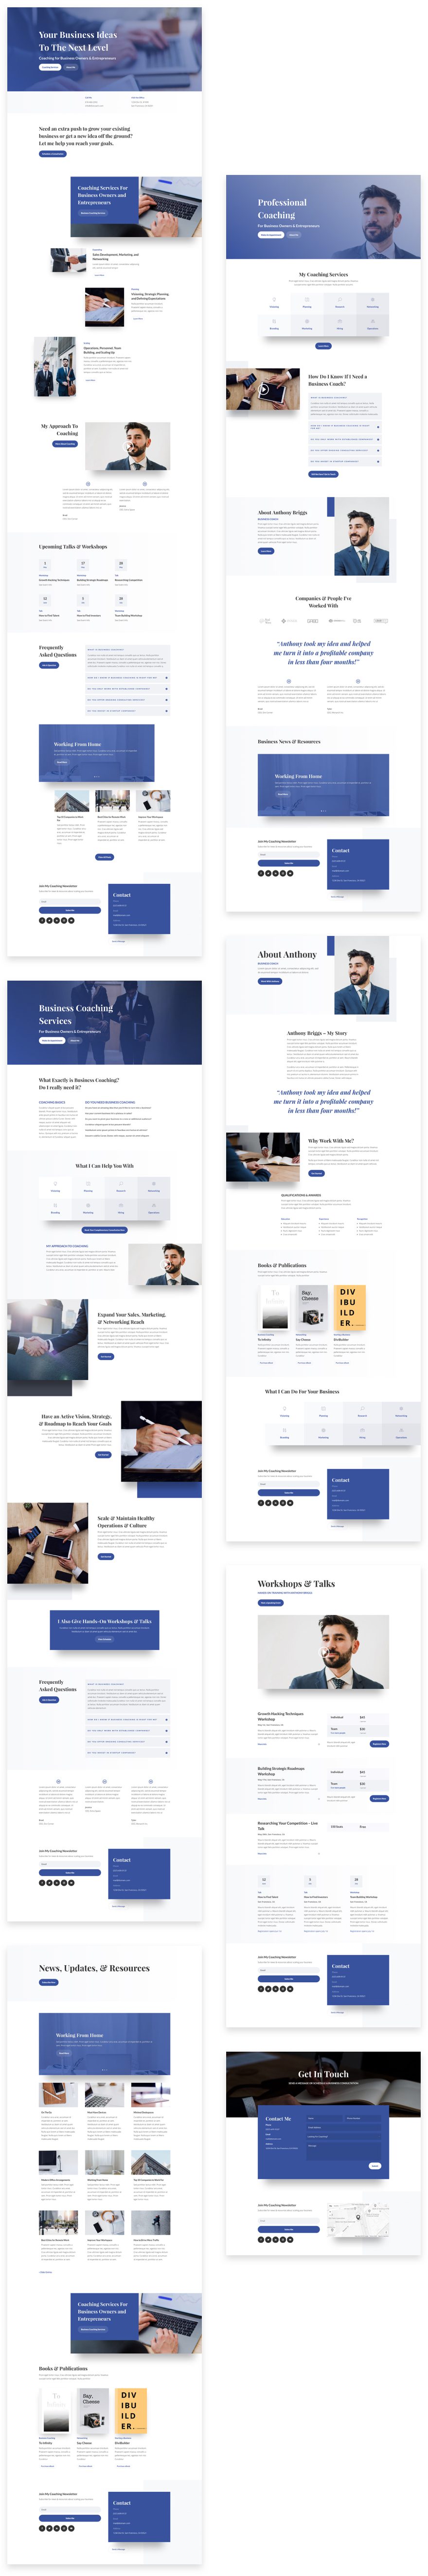 business coach layout pack